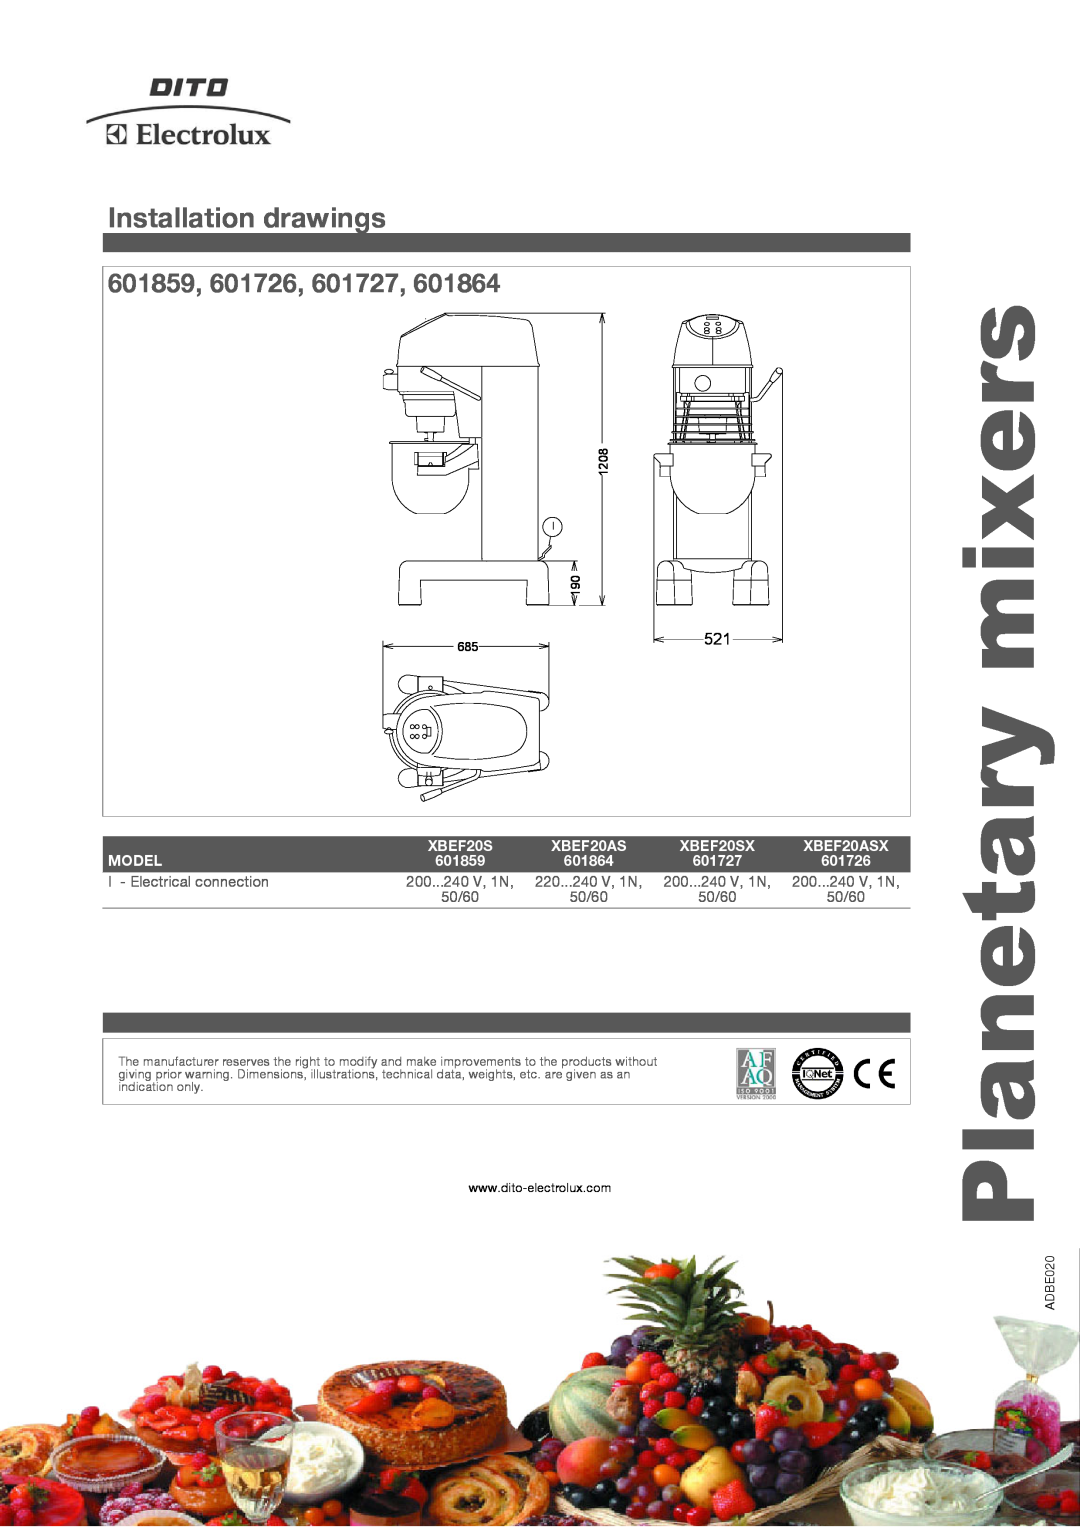 Electrolux XBEF20SX, XBE20, XBEF20ASX manual Installation drawings, mixers, Planetary, 601859, 601726, 601727 